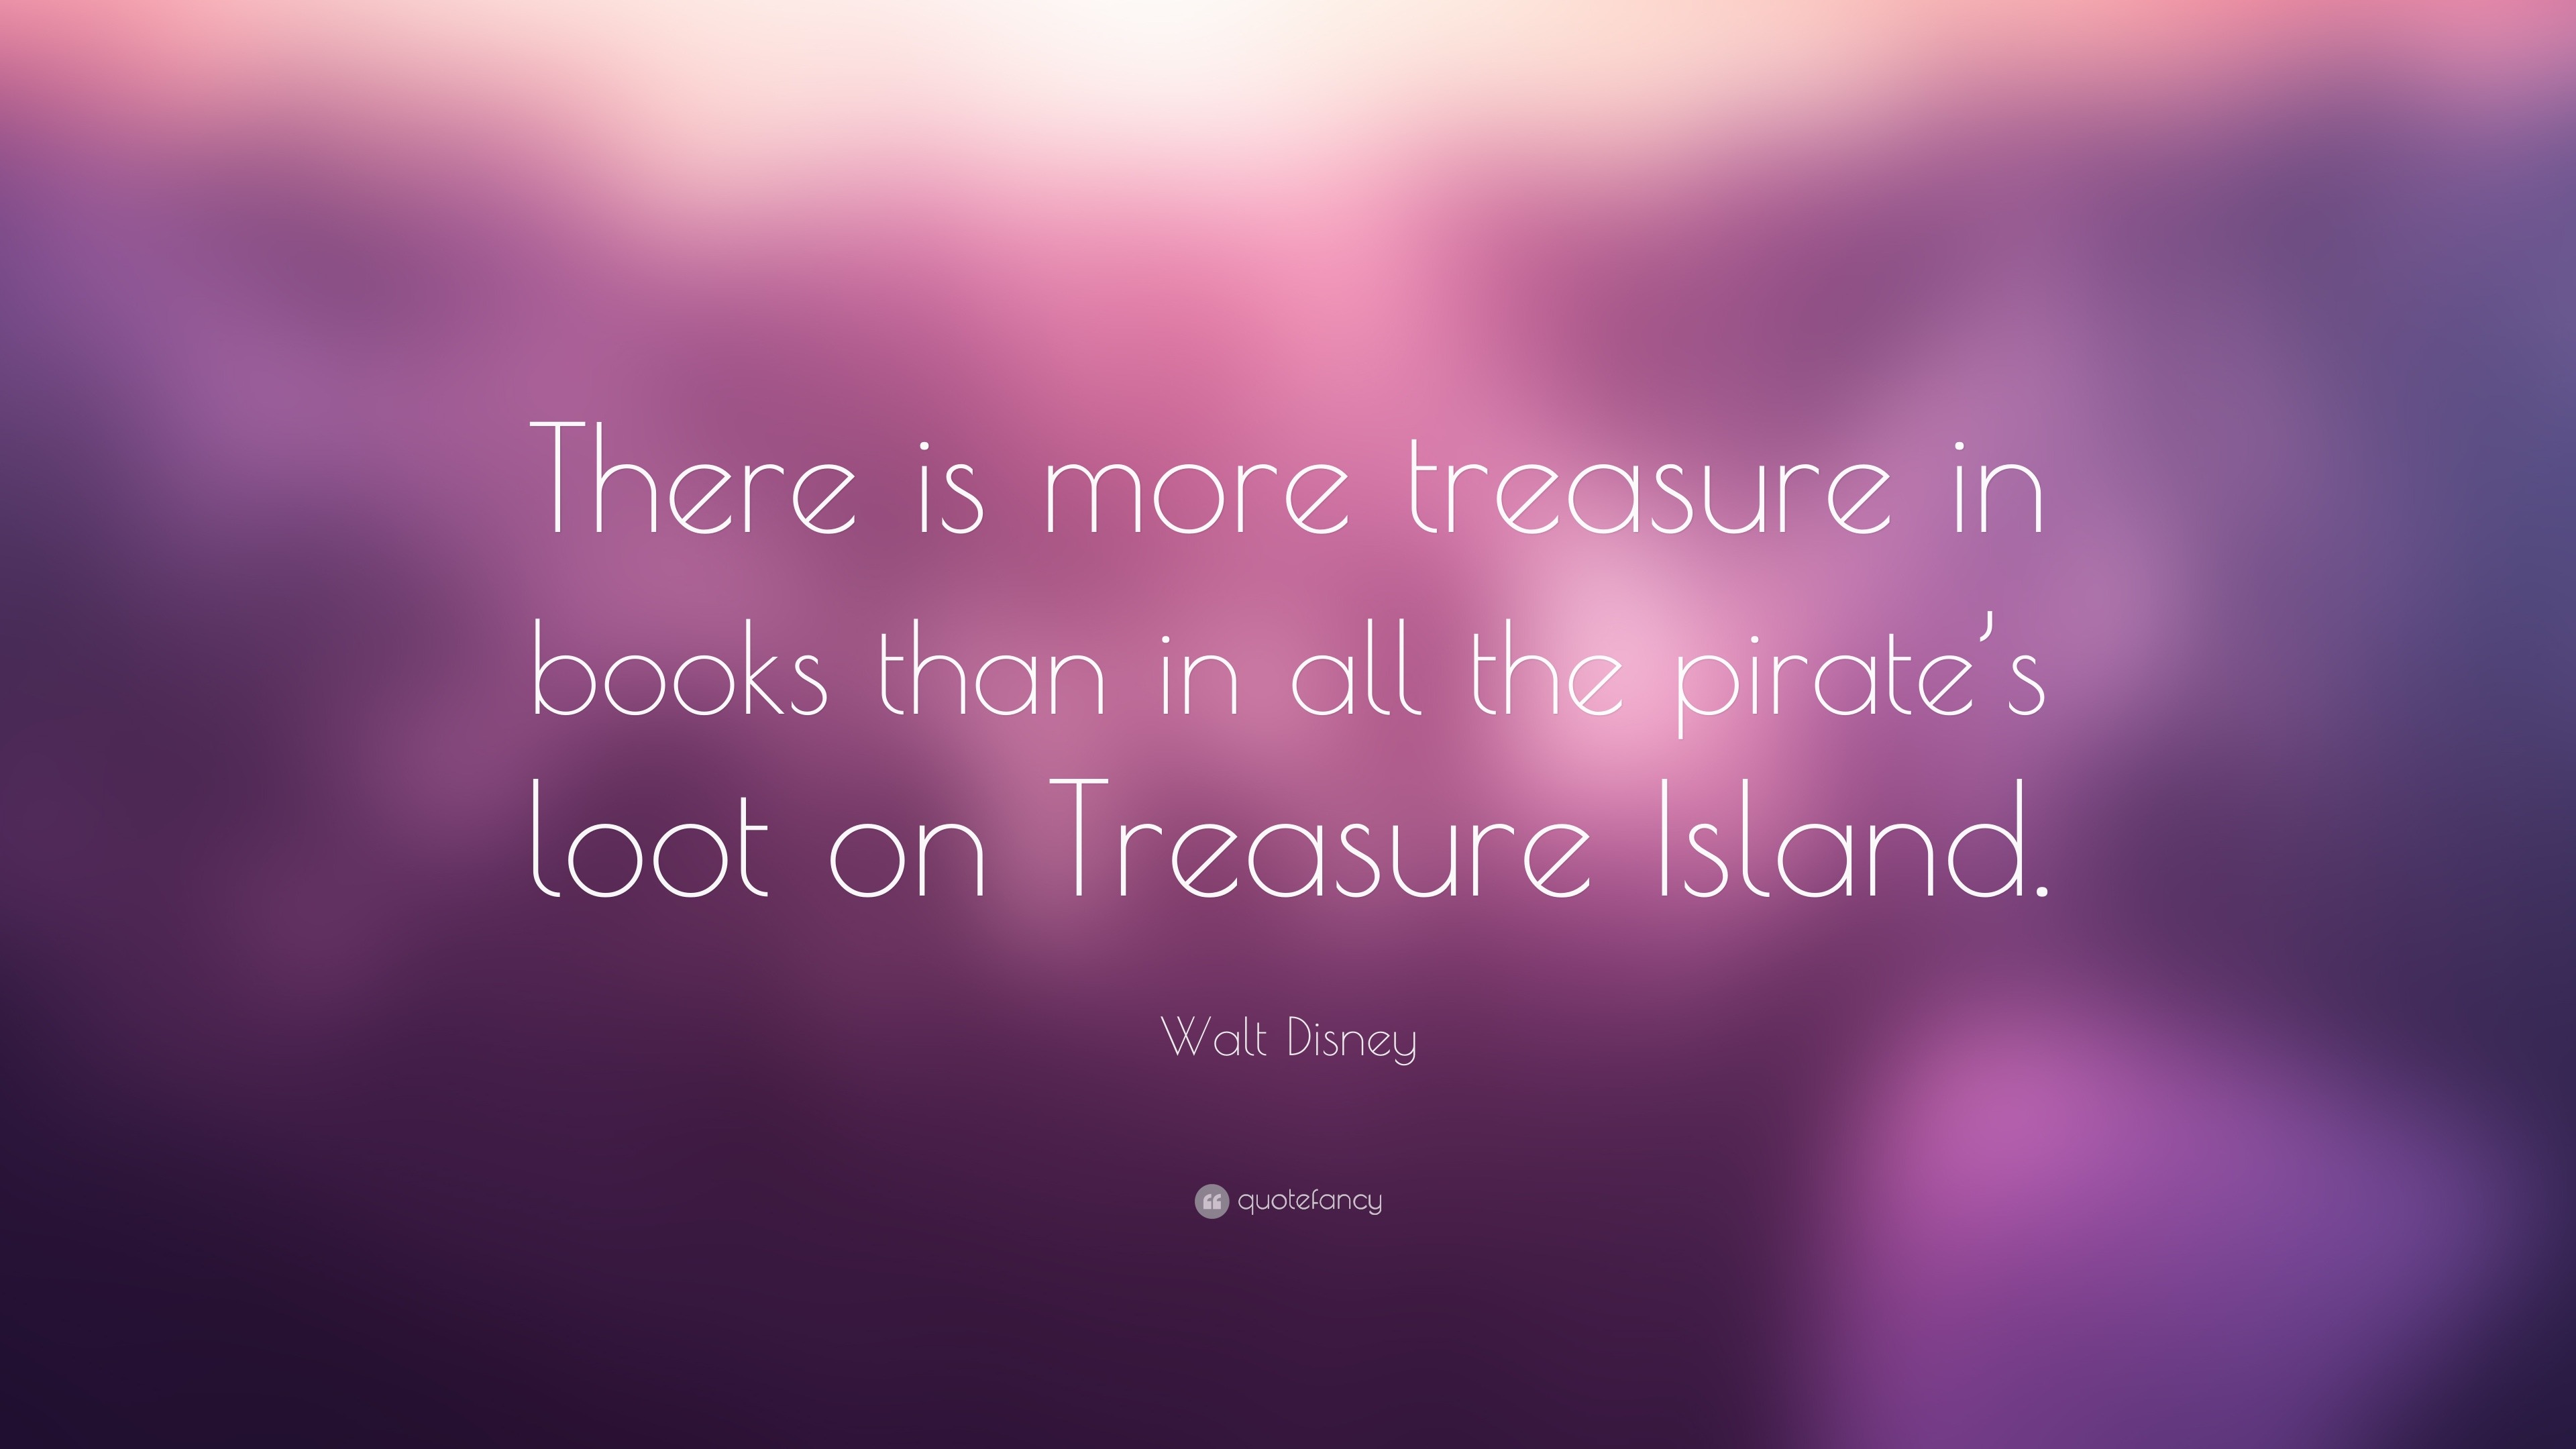 Walt Disney Quote: “There Is More Treasure In Books Than In All The Pirate's Loot On